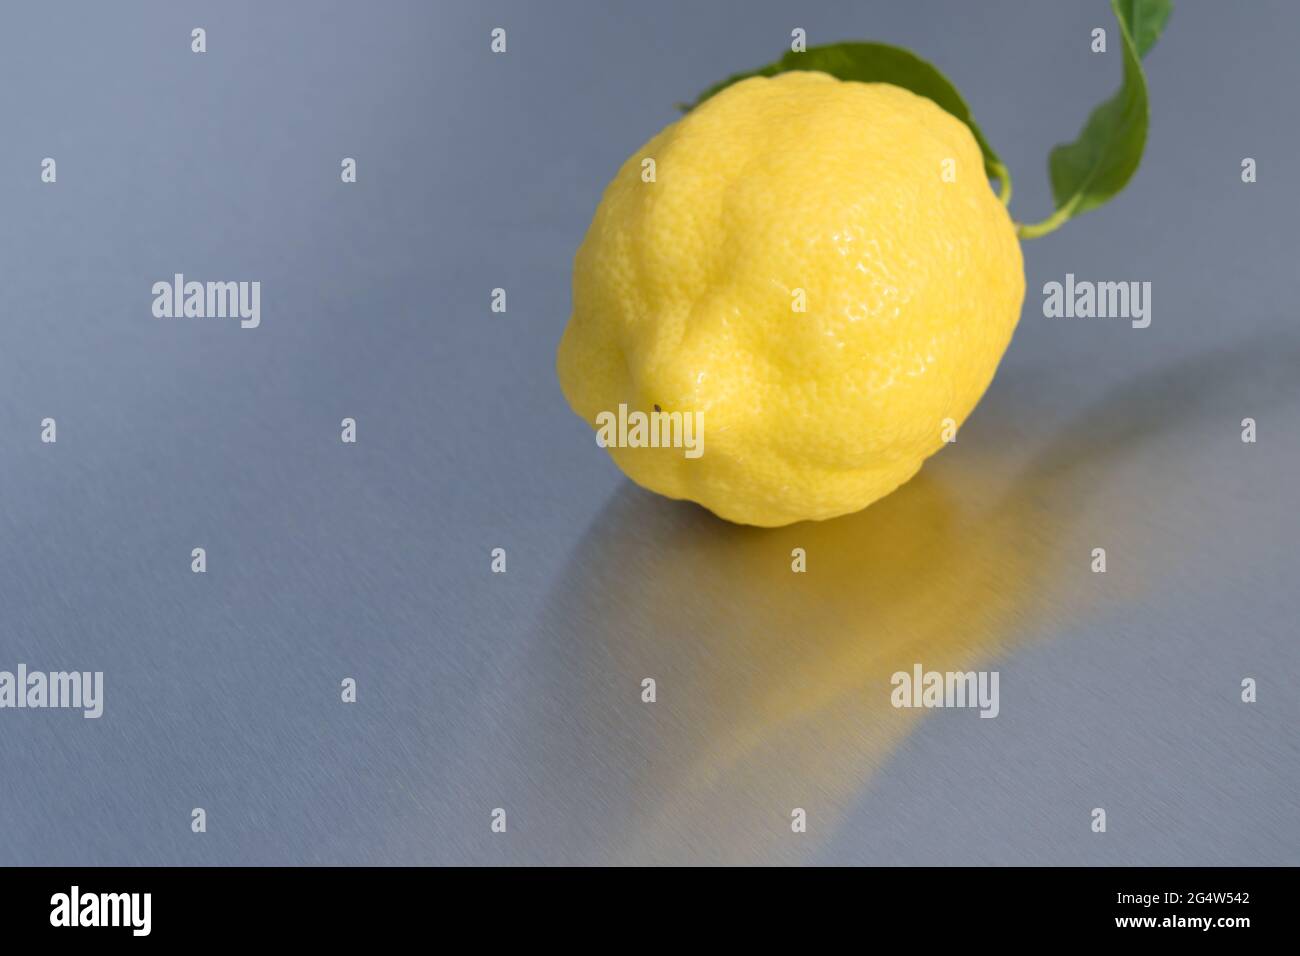 fresh sunny yellow lemon and leaf on clean metal background Stock Photo